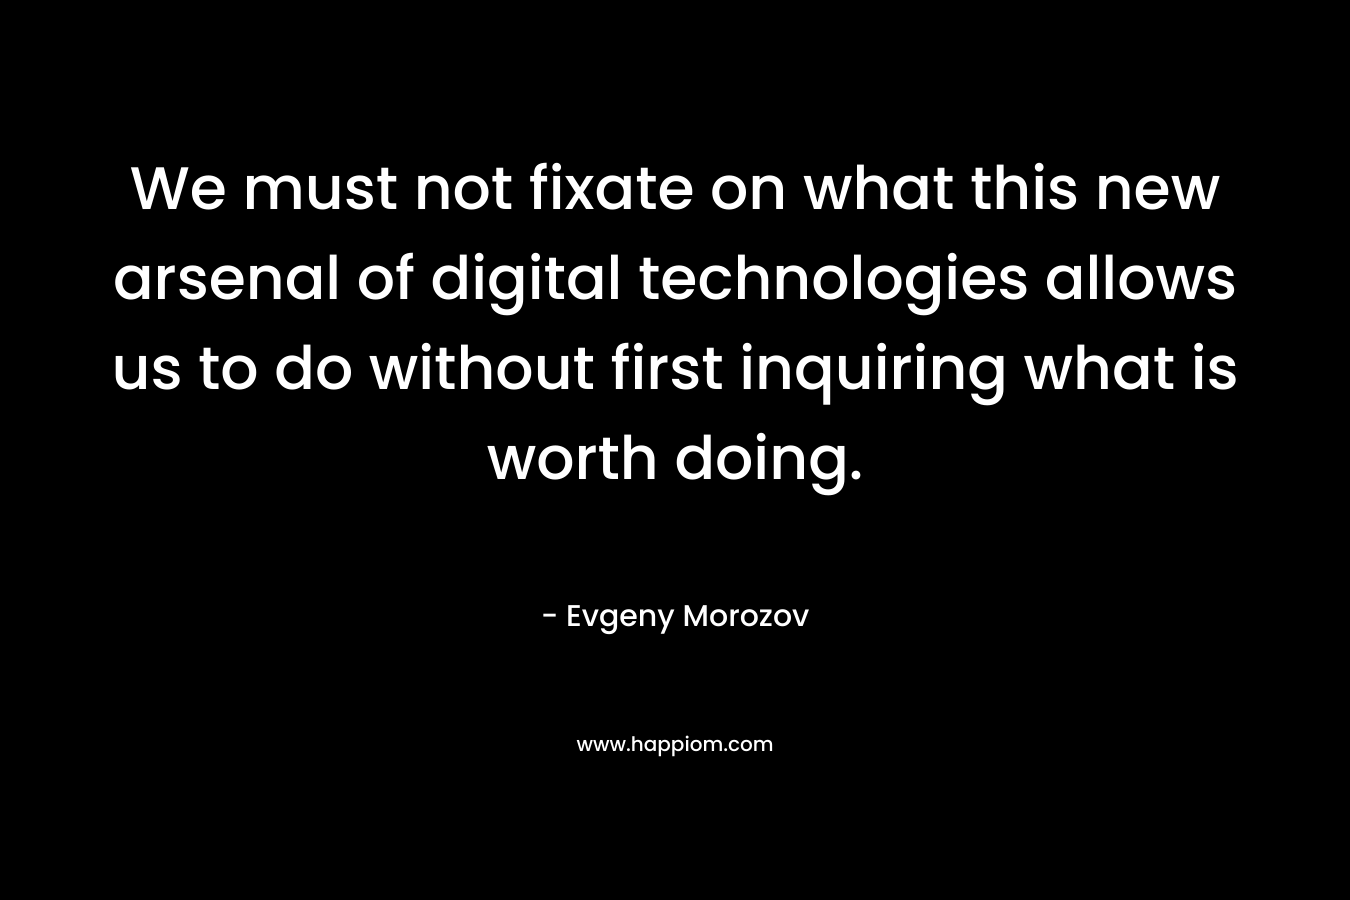 We must not fixate on what this new arsenal of digital technologies allows us to do without first inquiring what is worth doing. – Evgeny Morozov